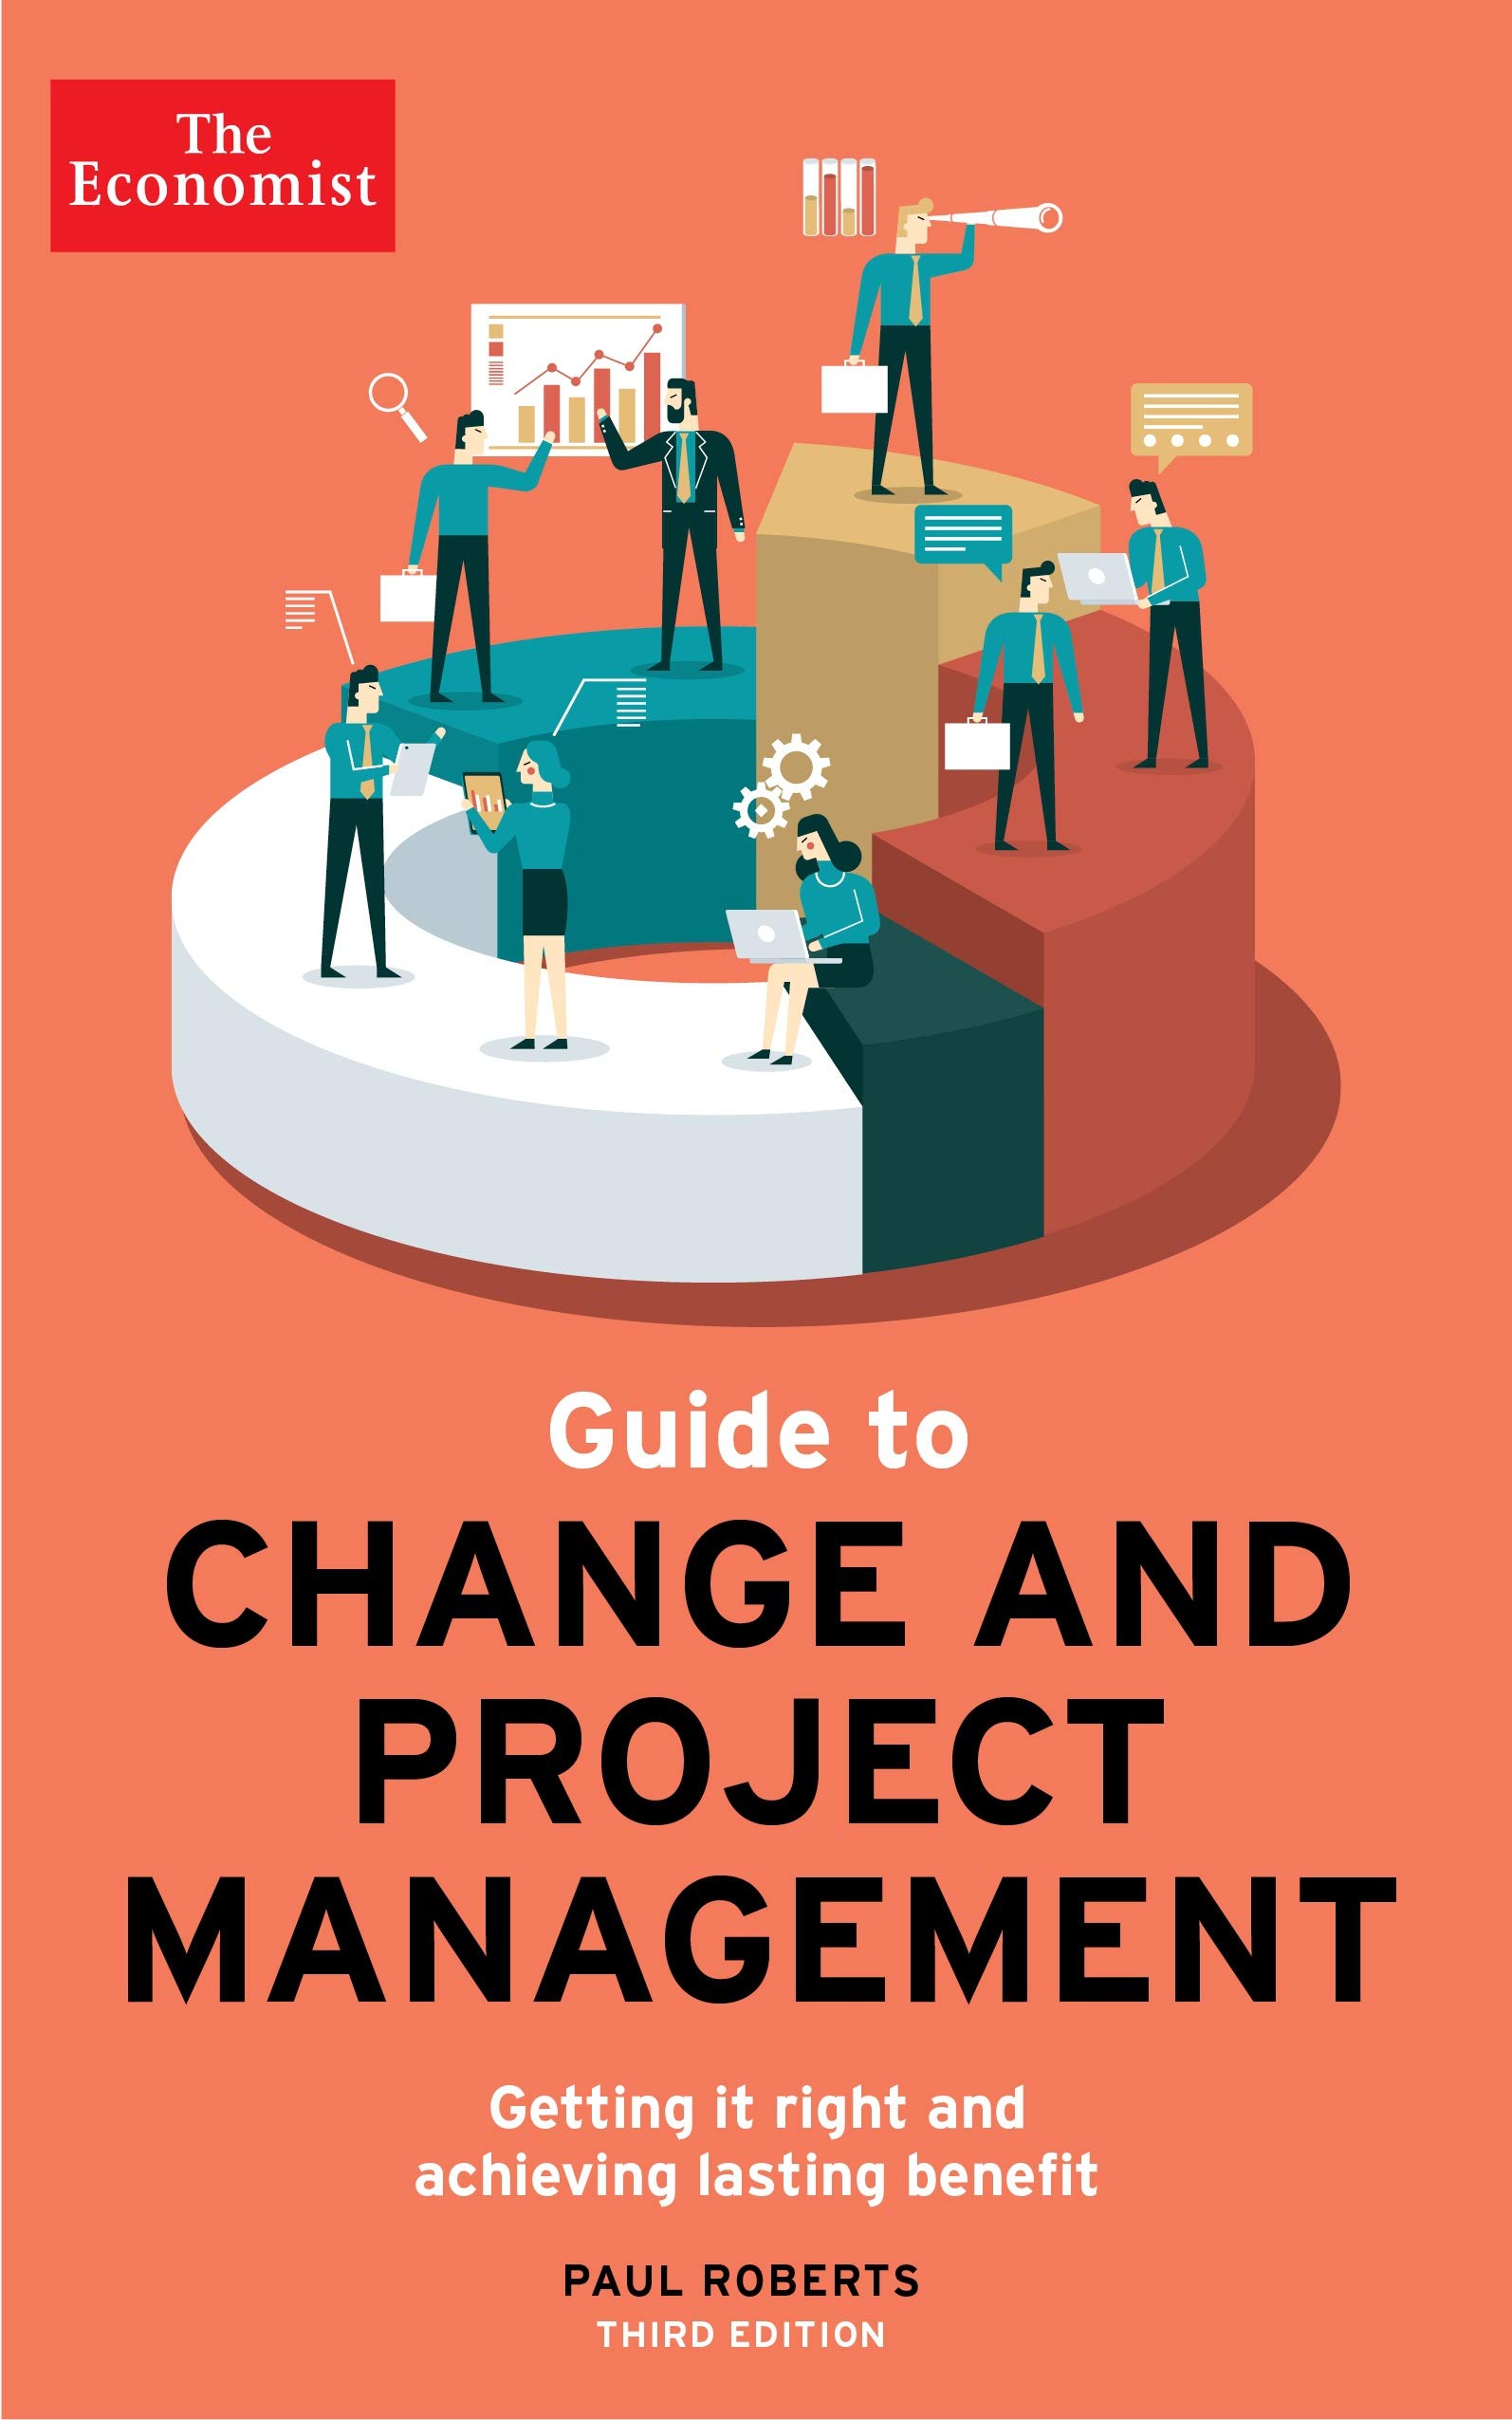 The Economist Guide to Change and Project Management | Paul Roberts